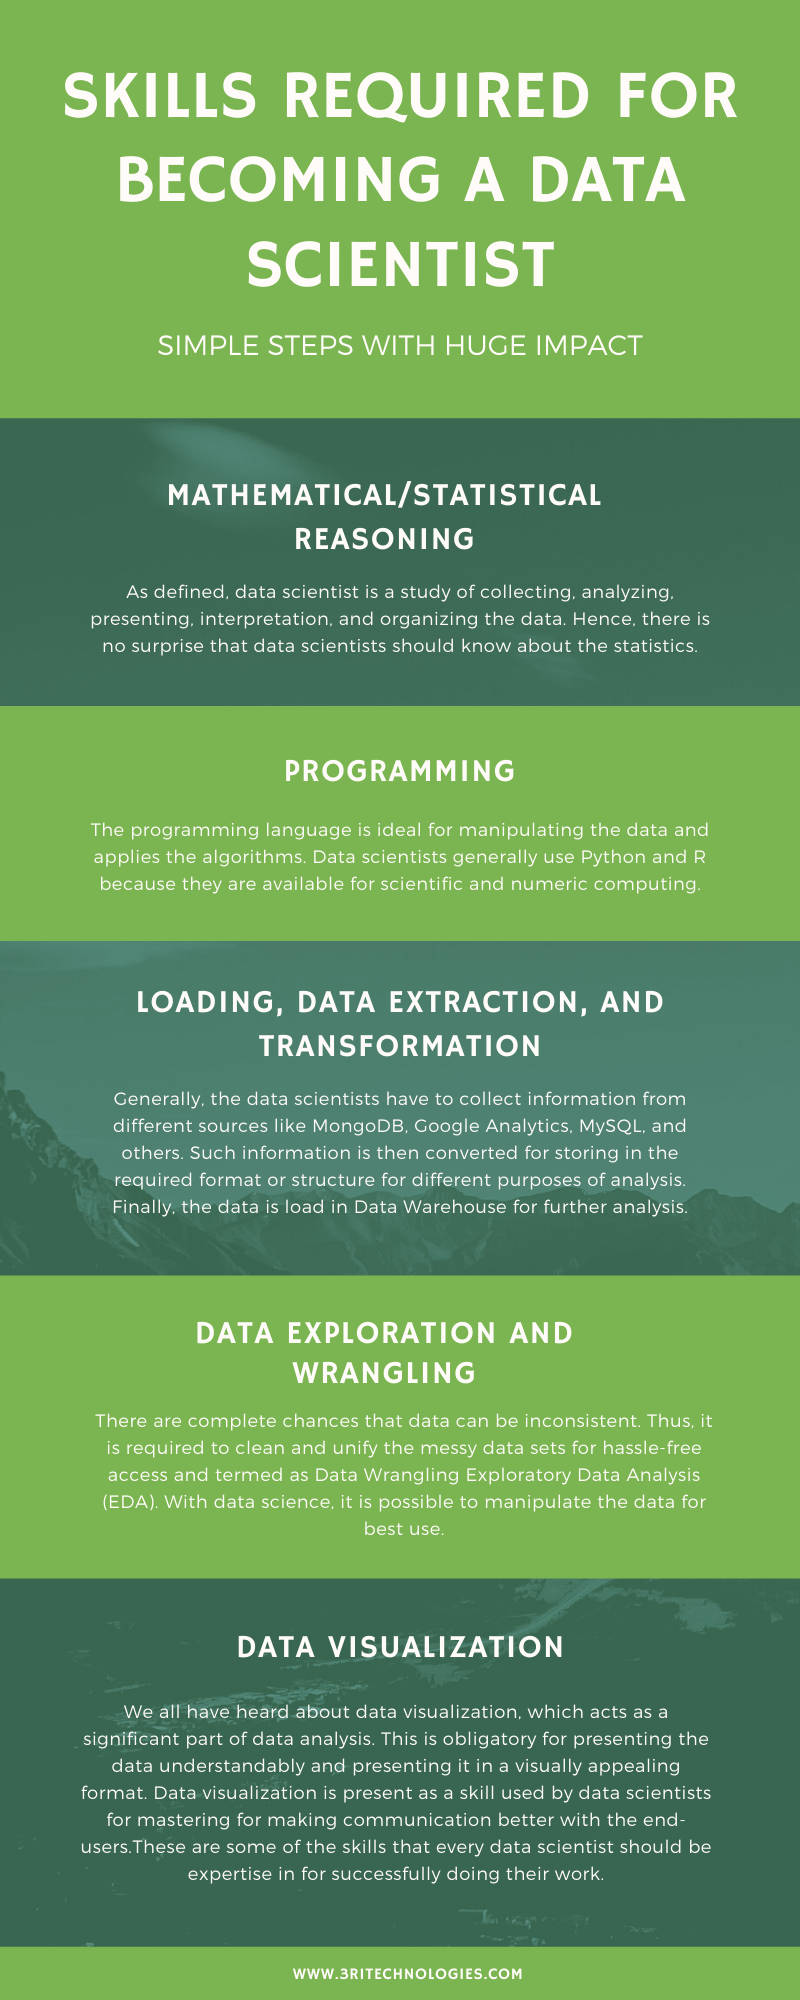 Skills required to become data scientist infographic